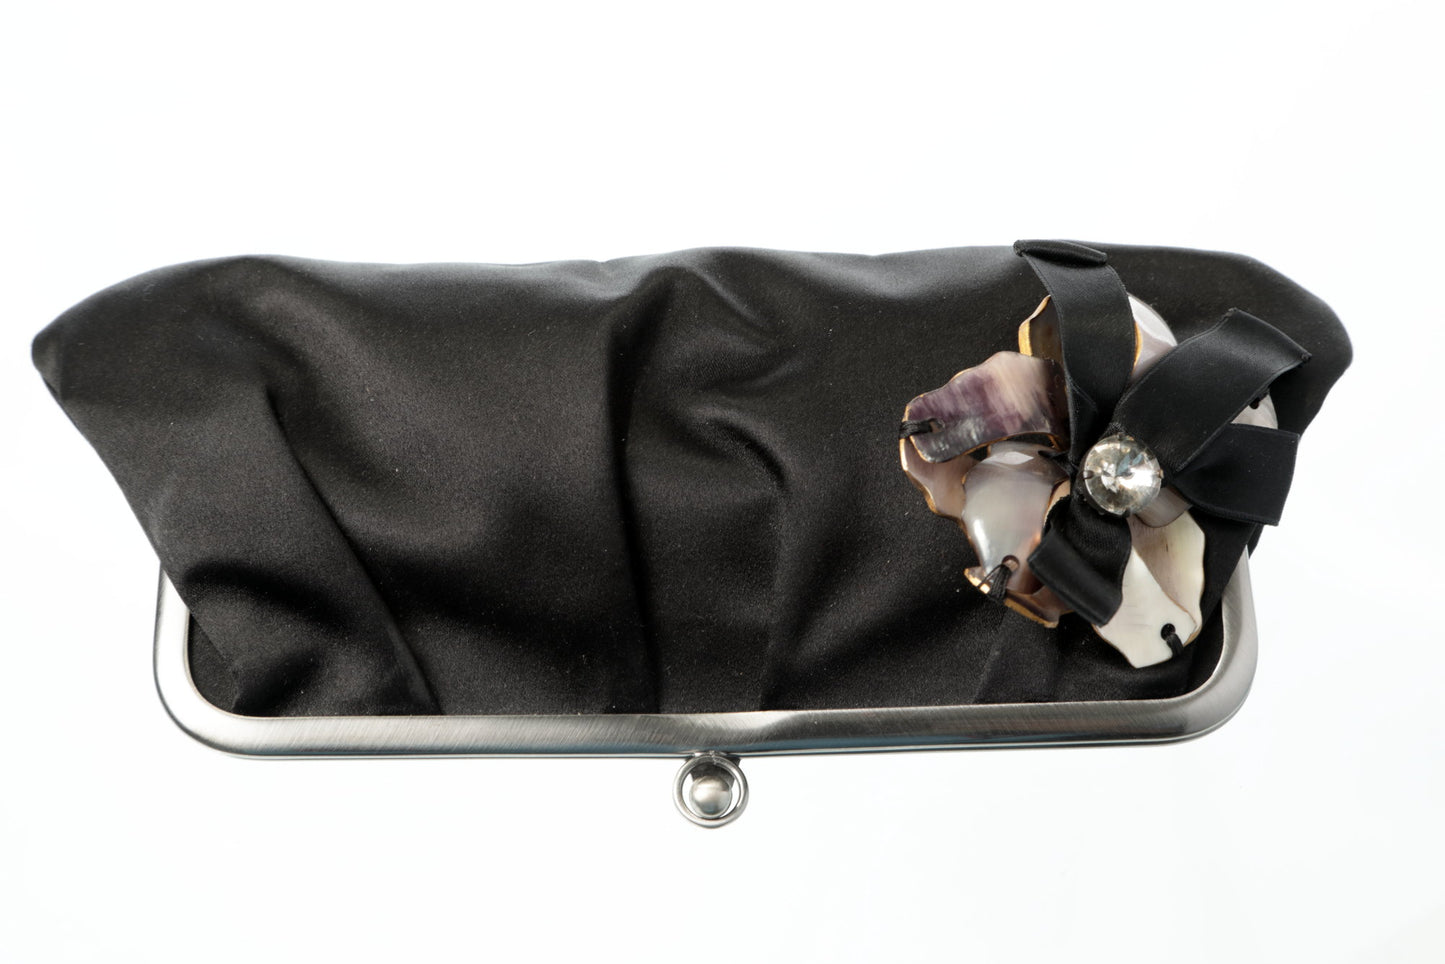 Evening clutch in black satin with floral application by Marni